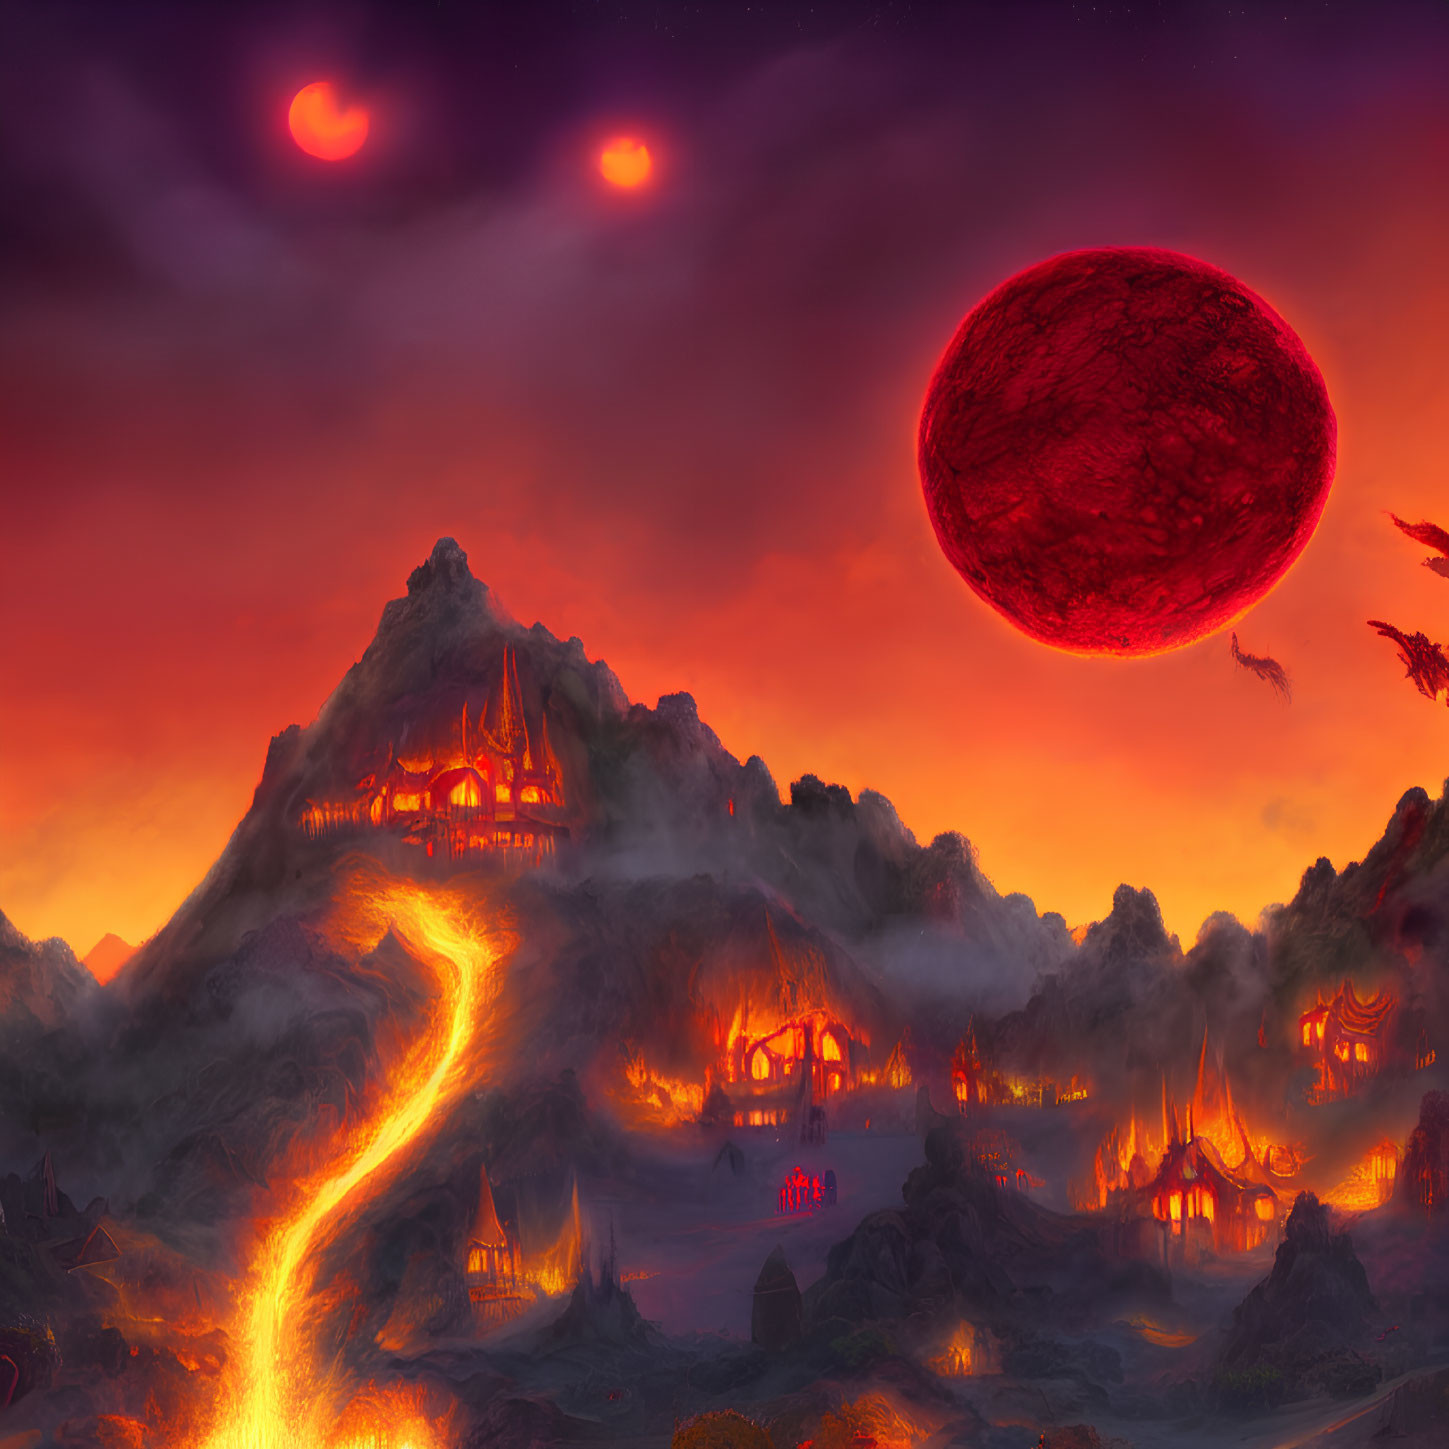 Volcanic landscape with dragons, glowing mountain structures, and dual moons